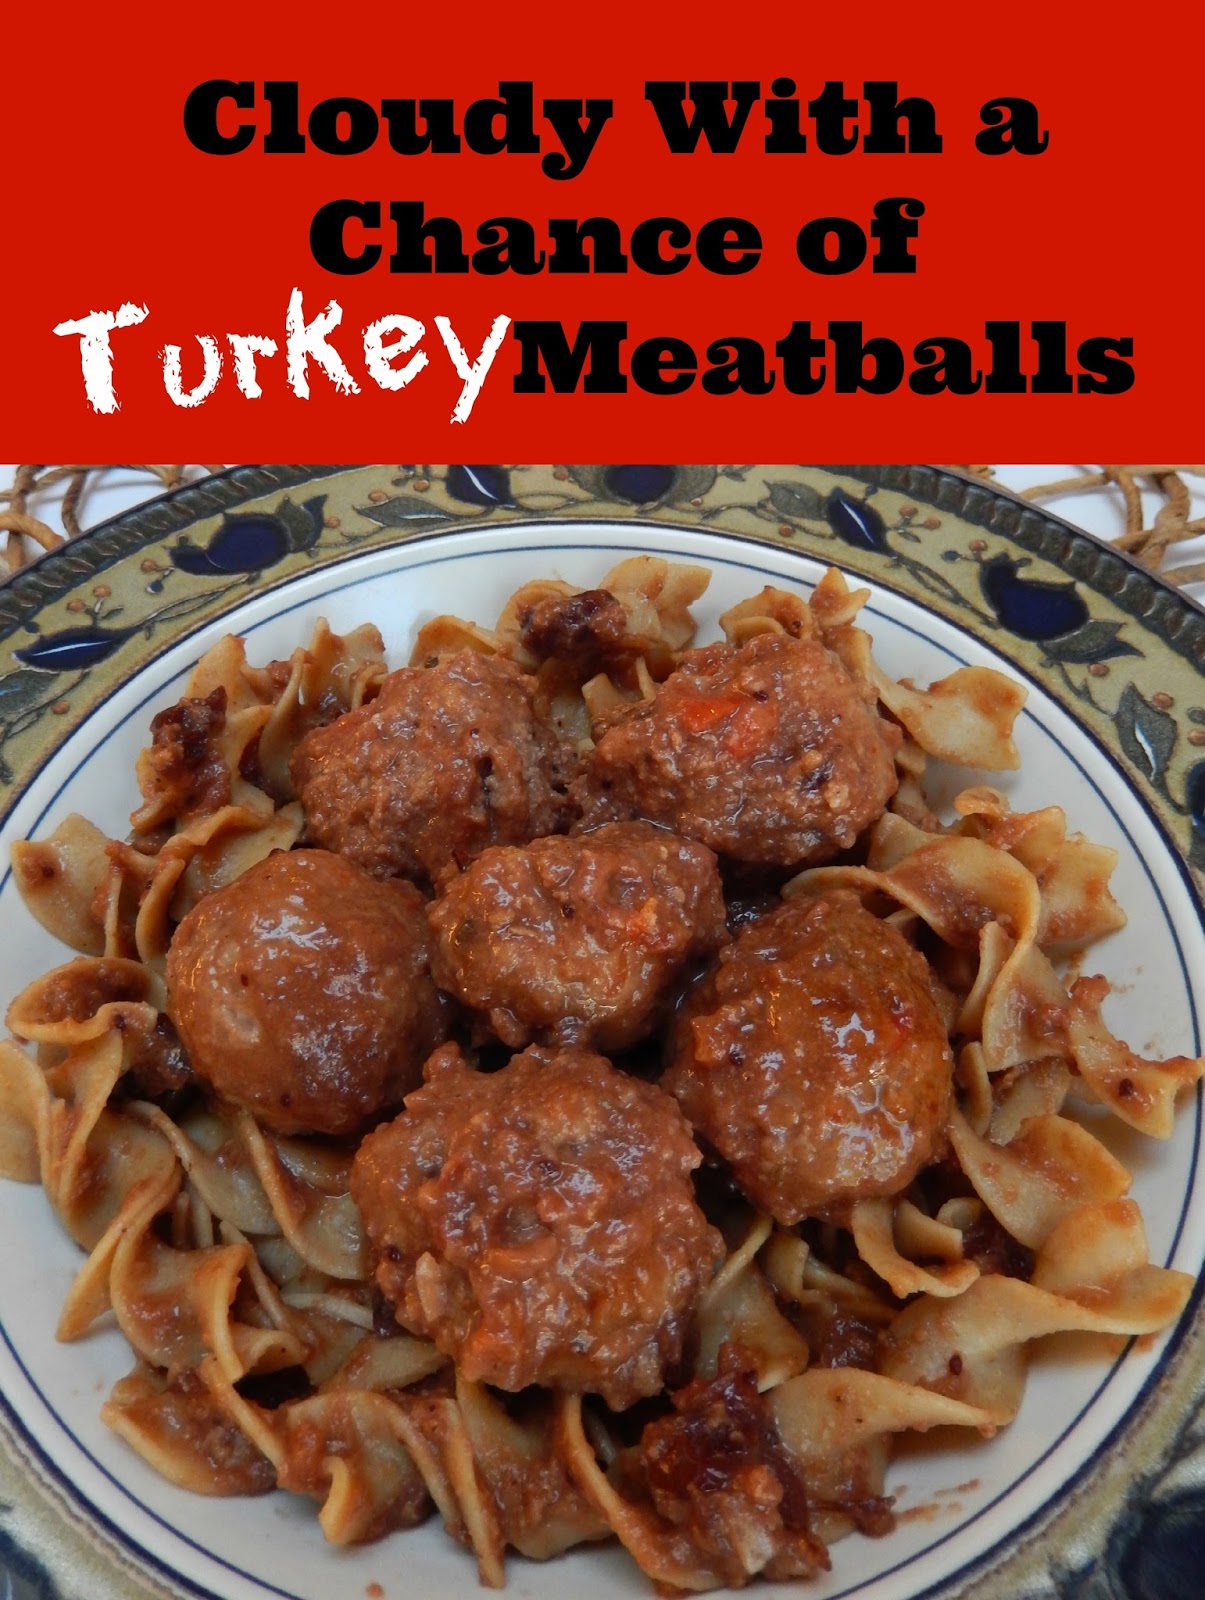 Cloudy With A Chance of Turkey Meatballs: Sweet and Sour Turkey Meatballs by Ms. Toody Goo Shoes